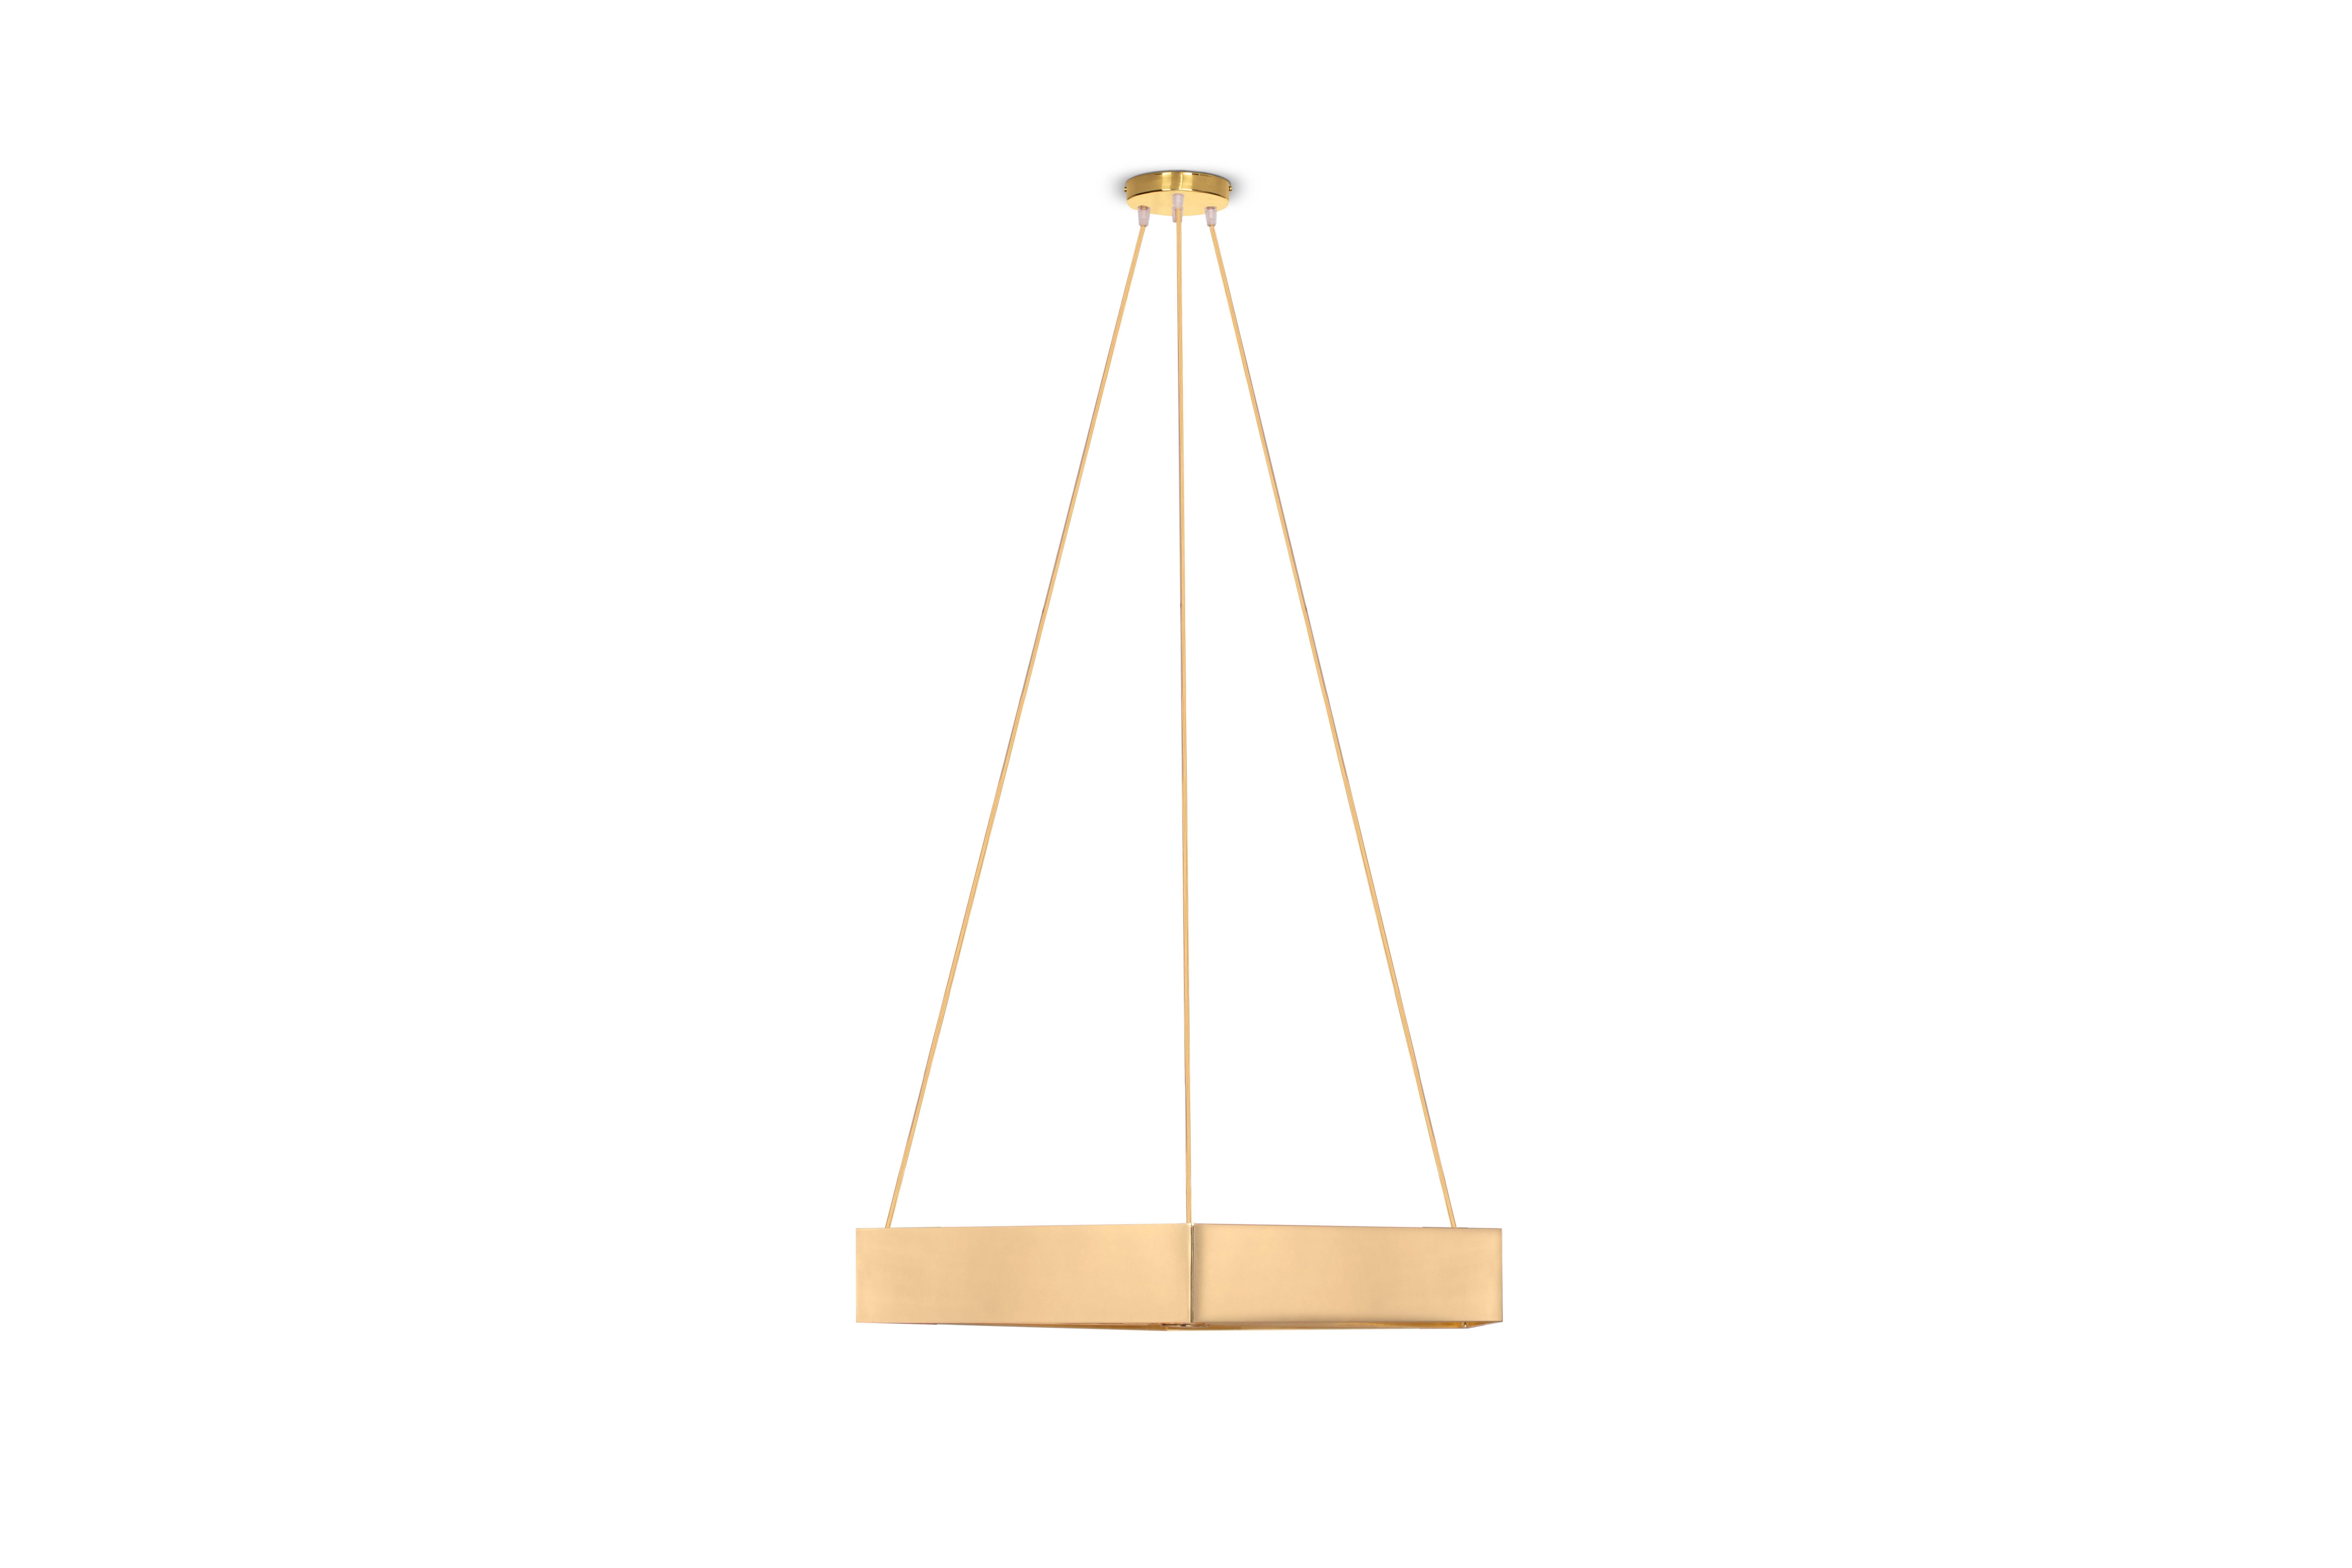 Honeybee ceiling lamp, Royal Stranger
Dimensions: 16 x 80 x 83 cm 
The total height is adjustable.
Material: brass (also available in copper or stainless steel in polished or brushed finish.).

A suspended element with hexagonal shape